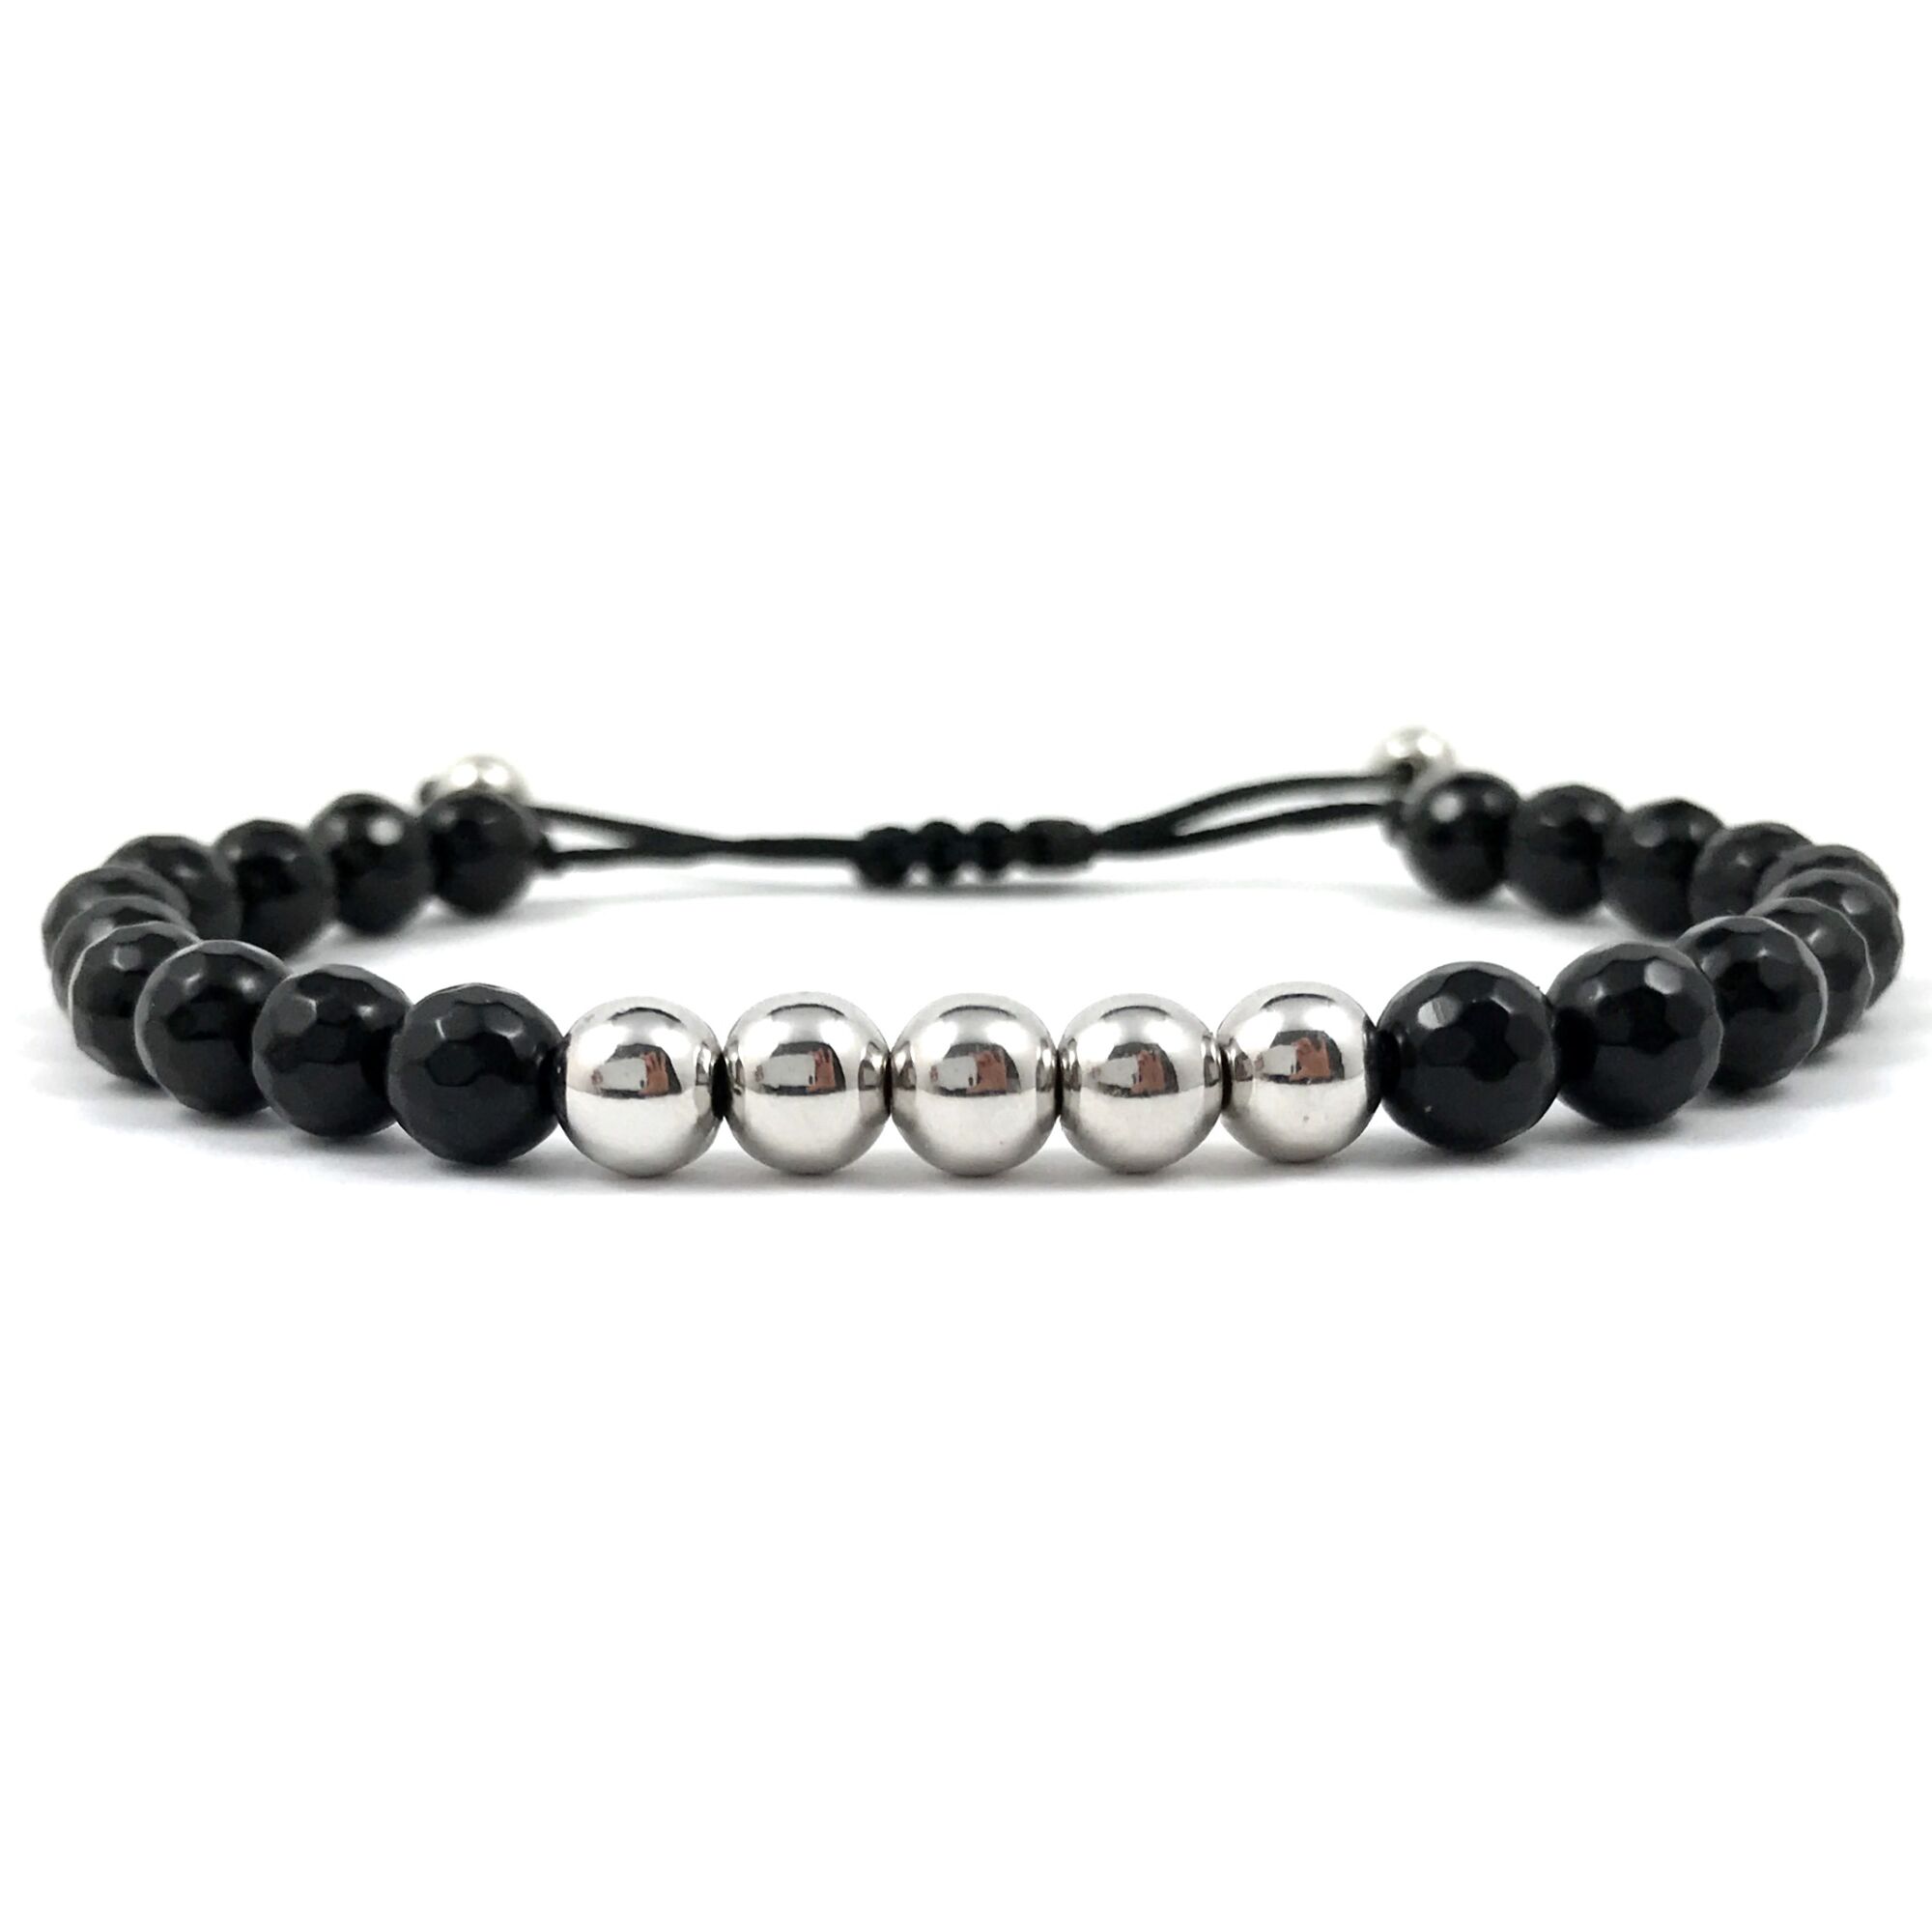  Faceted onyx and silver pearl cord bracelet